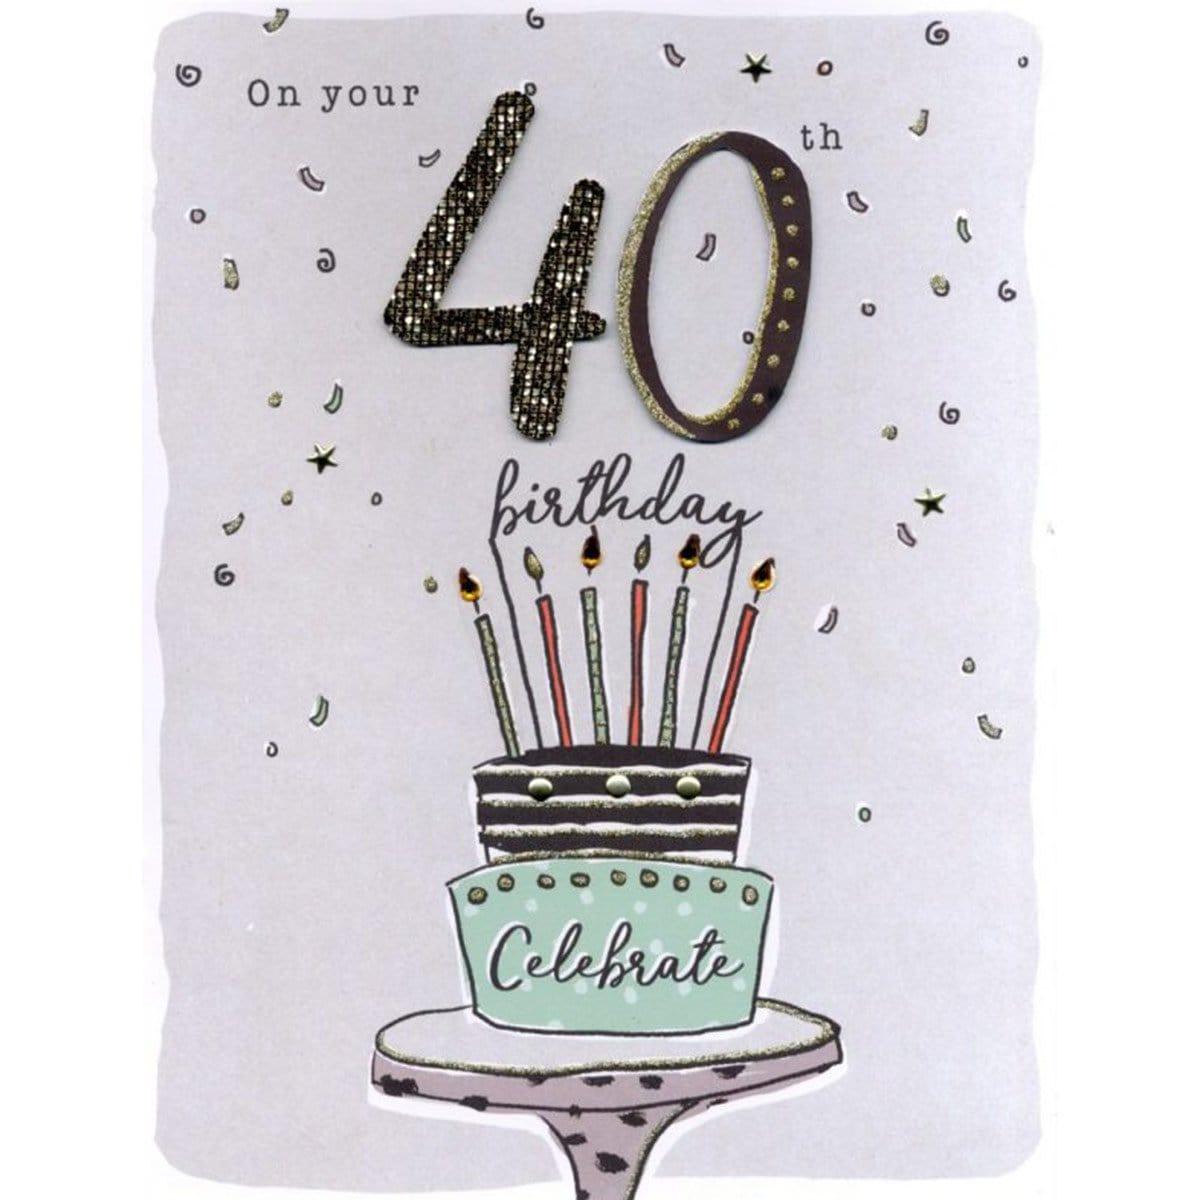 Buy Greeting Cards Gigantic Card - On Your 40Th Birthday sold at Party Expert